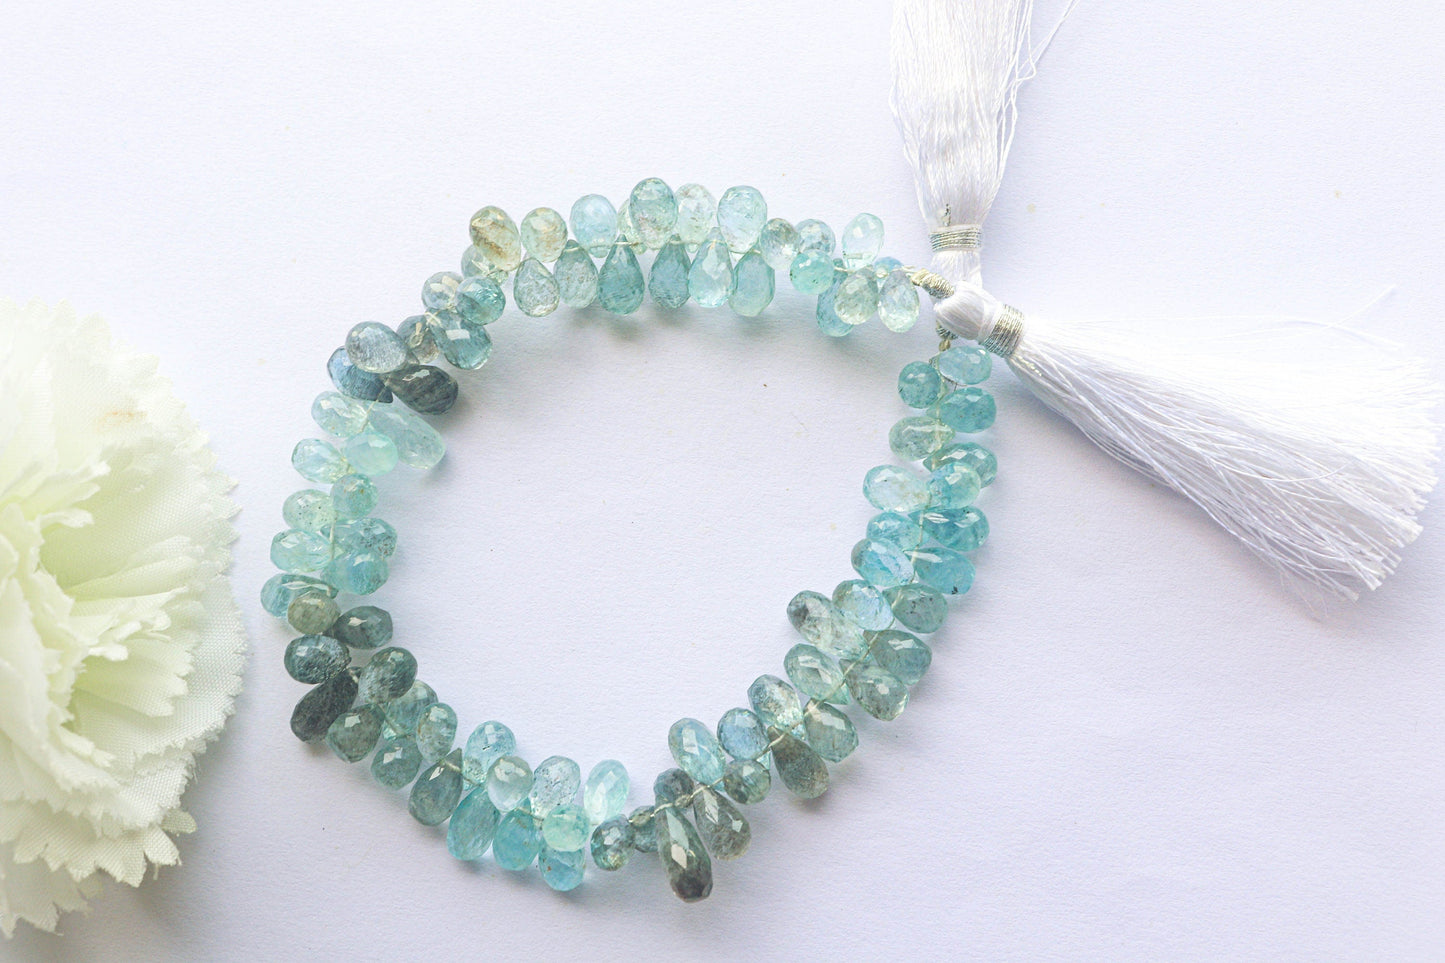 Moss Aquamarine Faceted Drops | 6x10mm to 7x12mm | 79 Pieces Full Strand | 9 Inch | Natural Moss Aquamarine | Beadsforyourjewellery Beadsforyourjewelry